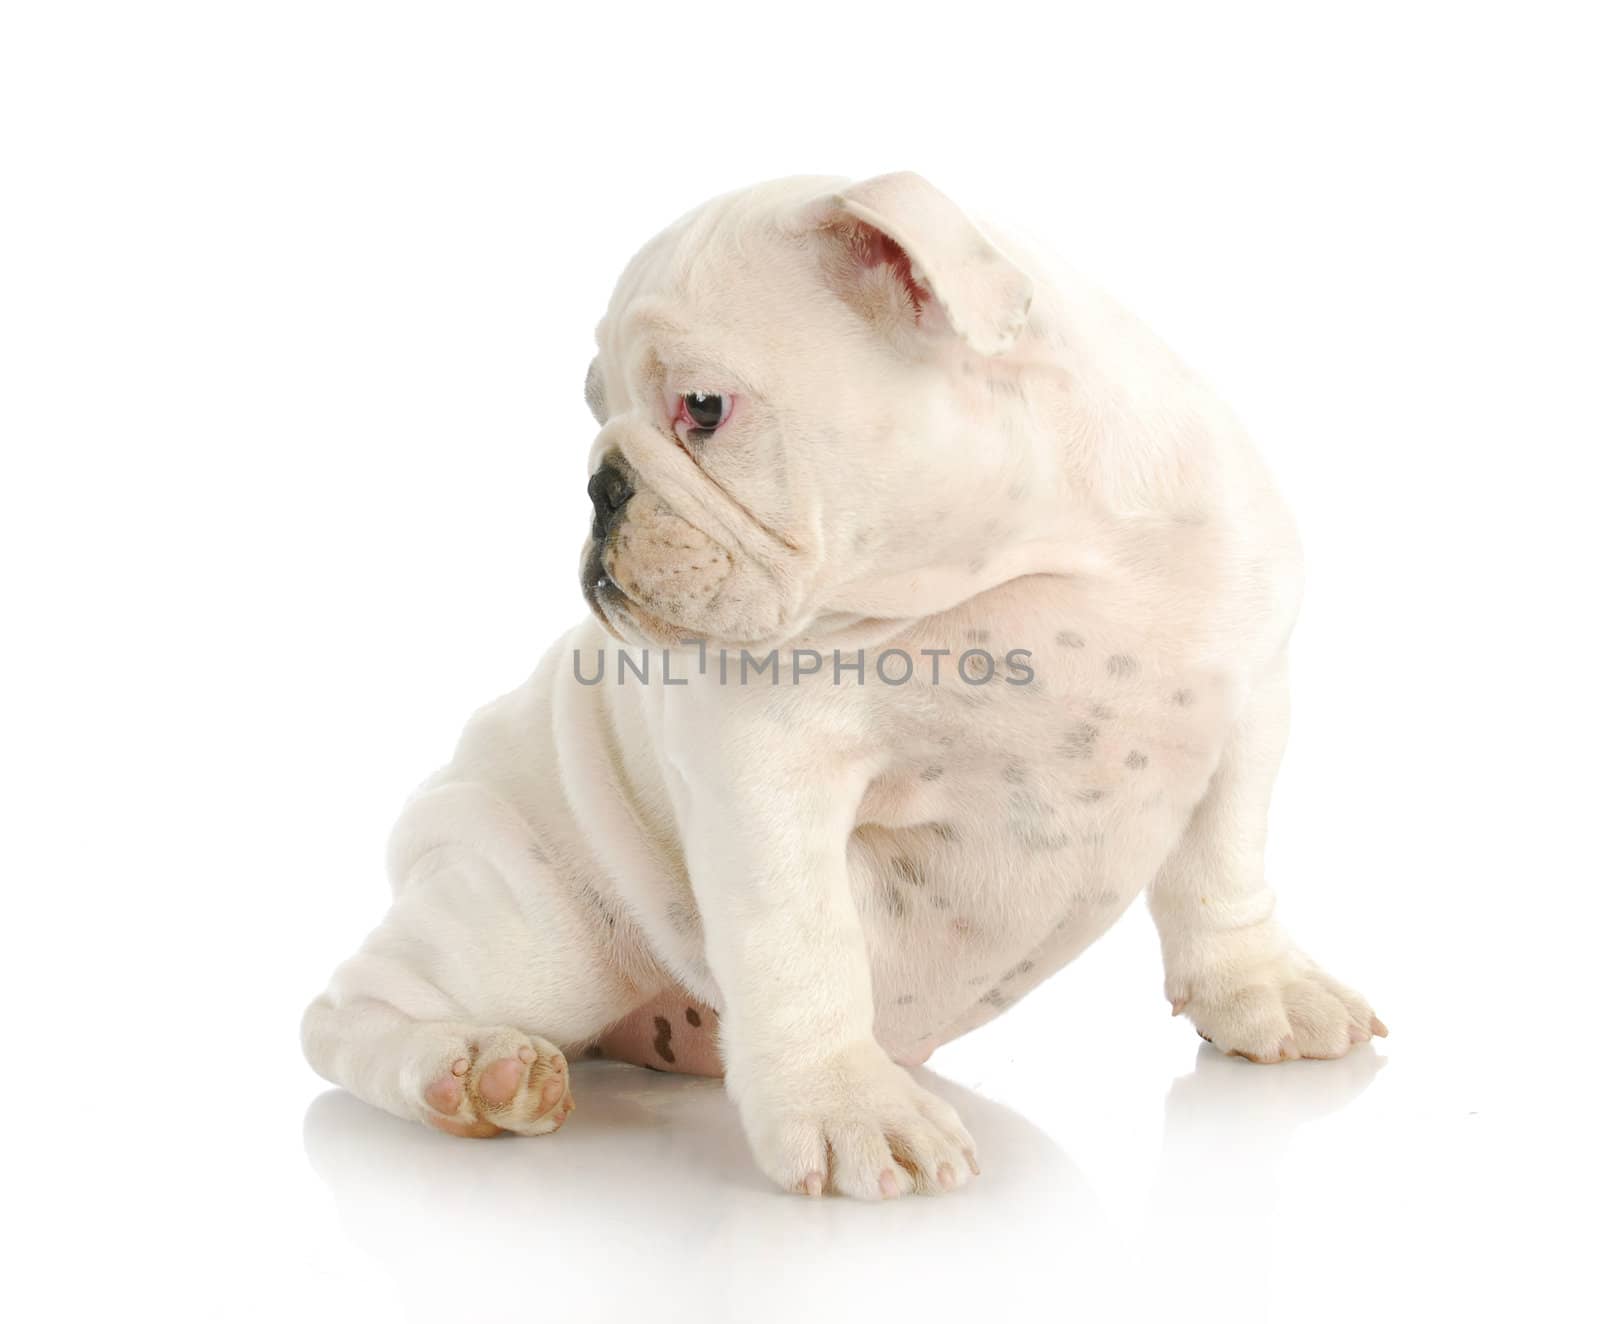 cute puppy - english bulldog puppy looking over shoulder isolated on white background - 12 weeks old